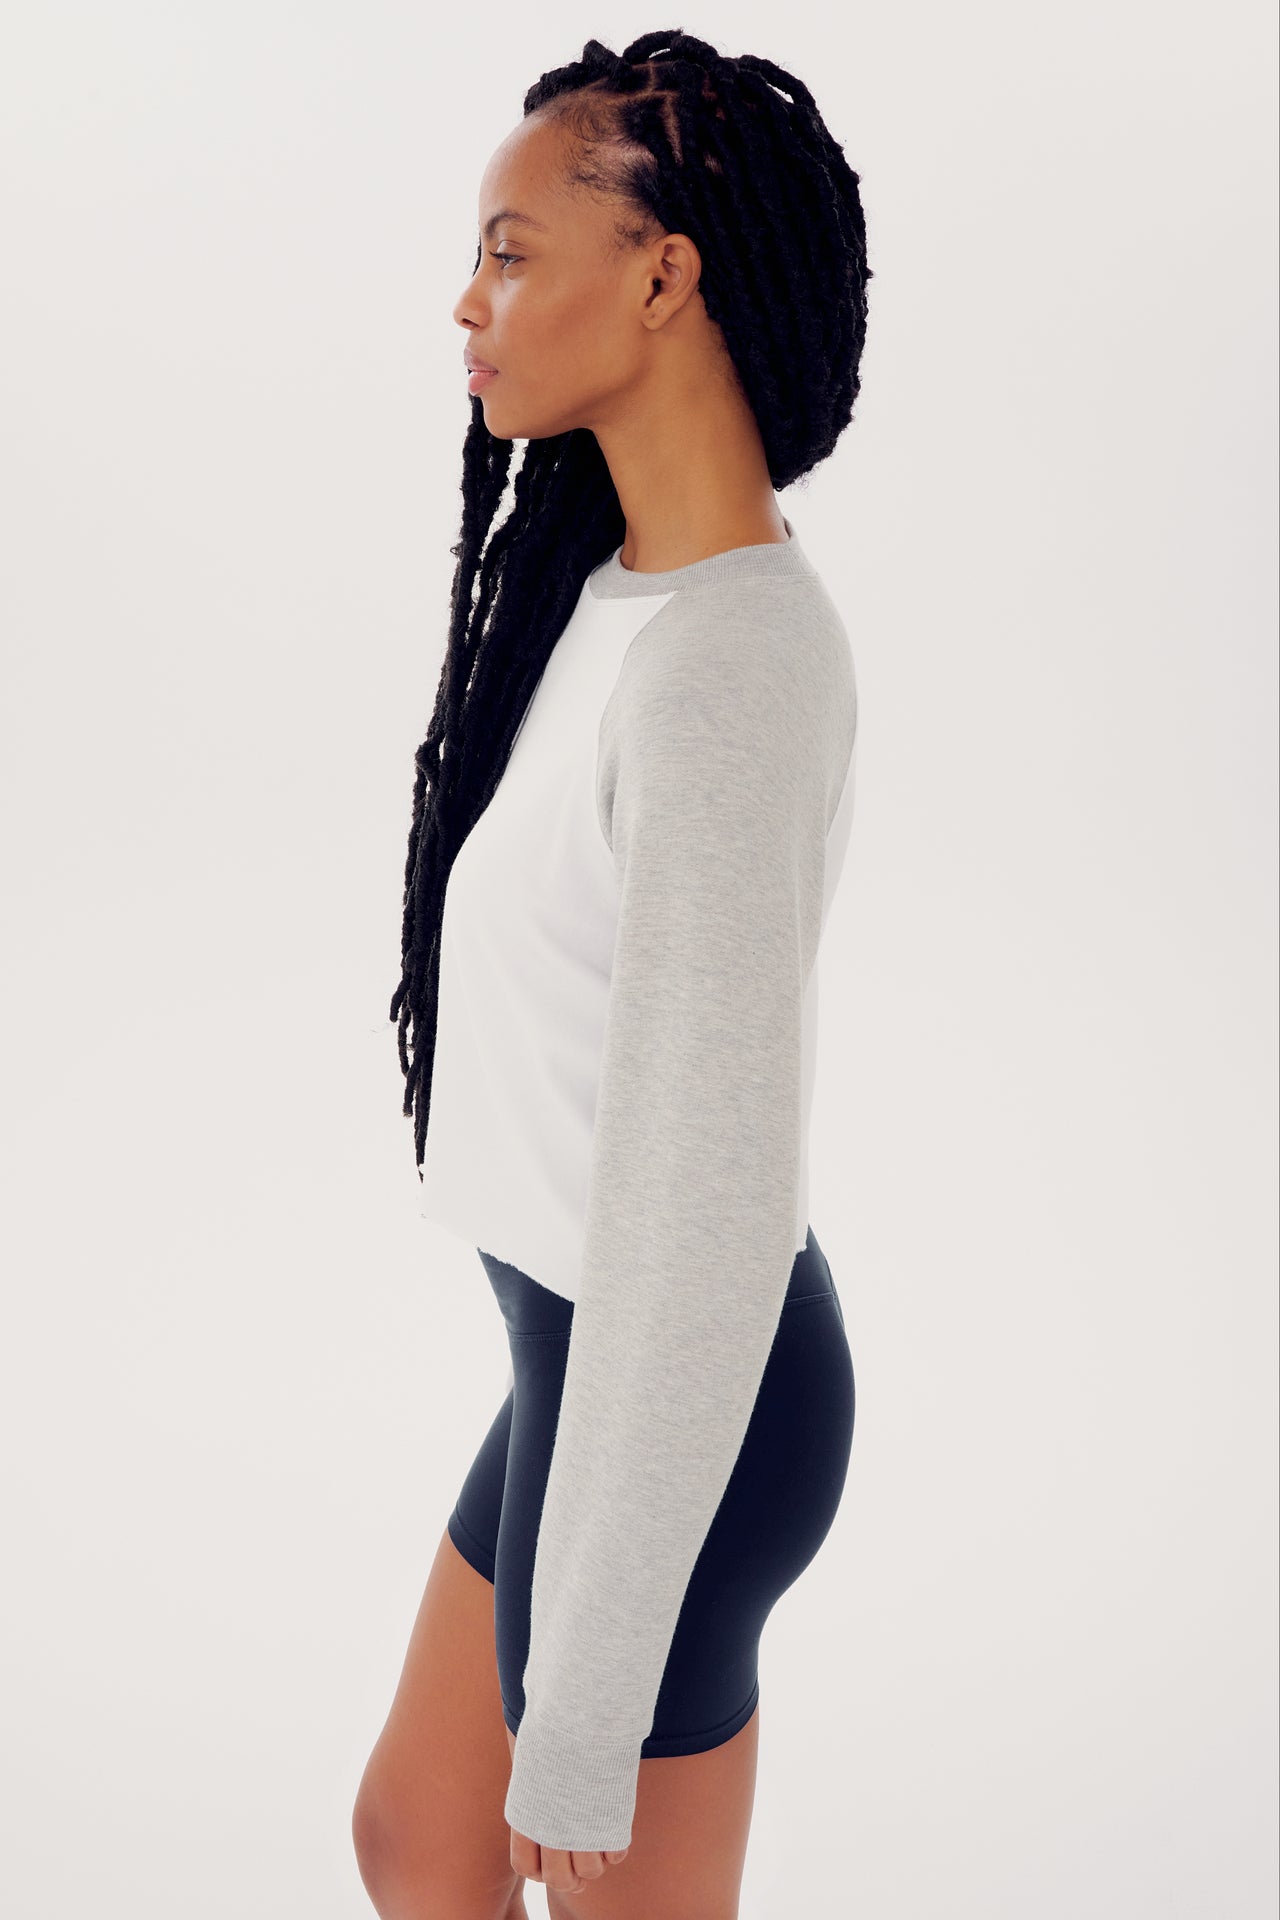 Woman in a SPLITS59 Warm Up Crop Fleece Sweatshirt in Heather Grey/White and navy spandex shorts, standing sideways with long braided hair.